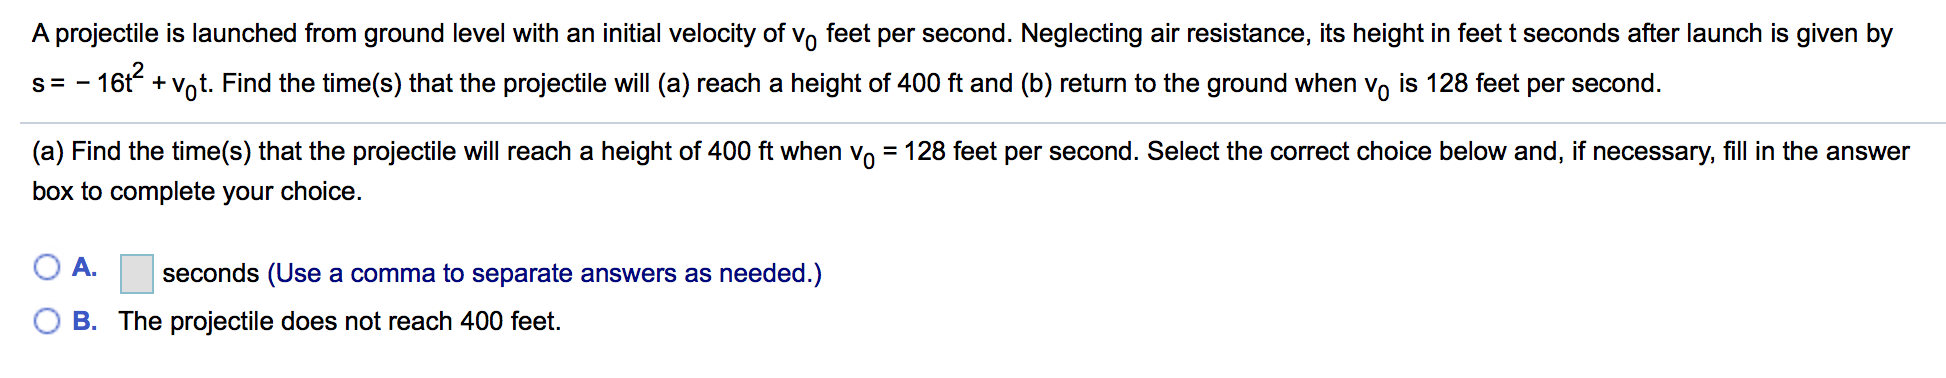 A projectile is launched from ground level with an initial velocity of vo feet per second. Neglecting air resistance, its height in feet t seconds after launch is given by
s-16t +Vot. Find the time(s) that the projectile will (a) reach a height of 400 ft and (b) return to the ground when vo is 128 feet per second.
(a) Find the time(s) that the projectile will reach a height of 400 ft when vo 128 feet per second. Select the correct choice below and, if necessary, fill in the answer
box to complete your choice.
( A. seconds (Use a comma to separate answers as needed.)
O B. The projectile does not reach 400 feet.
